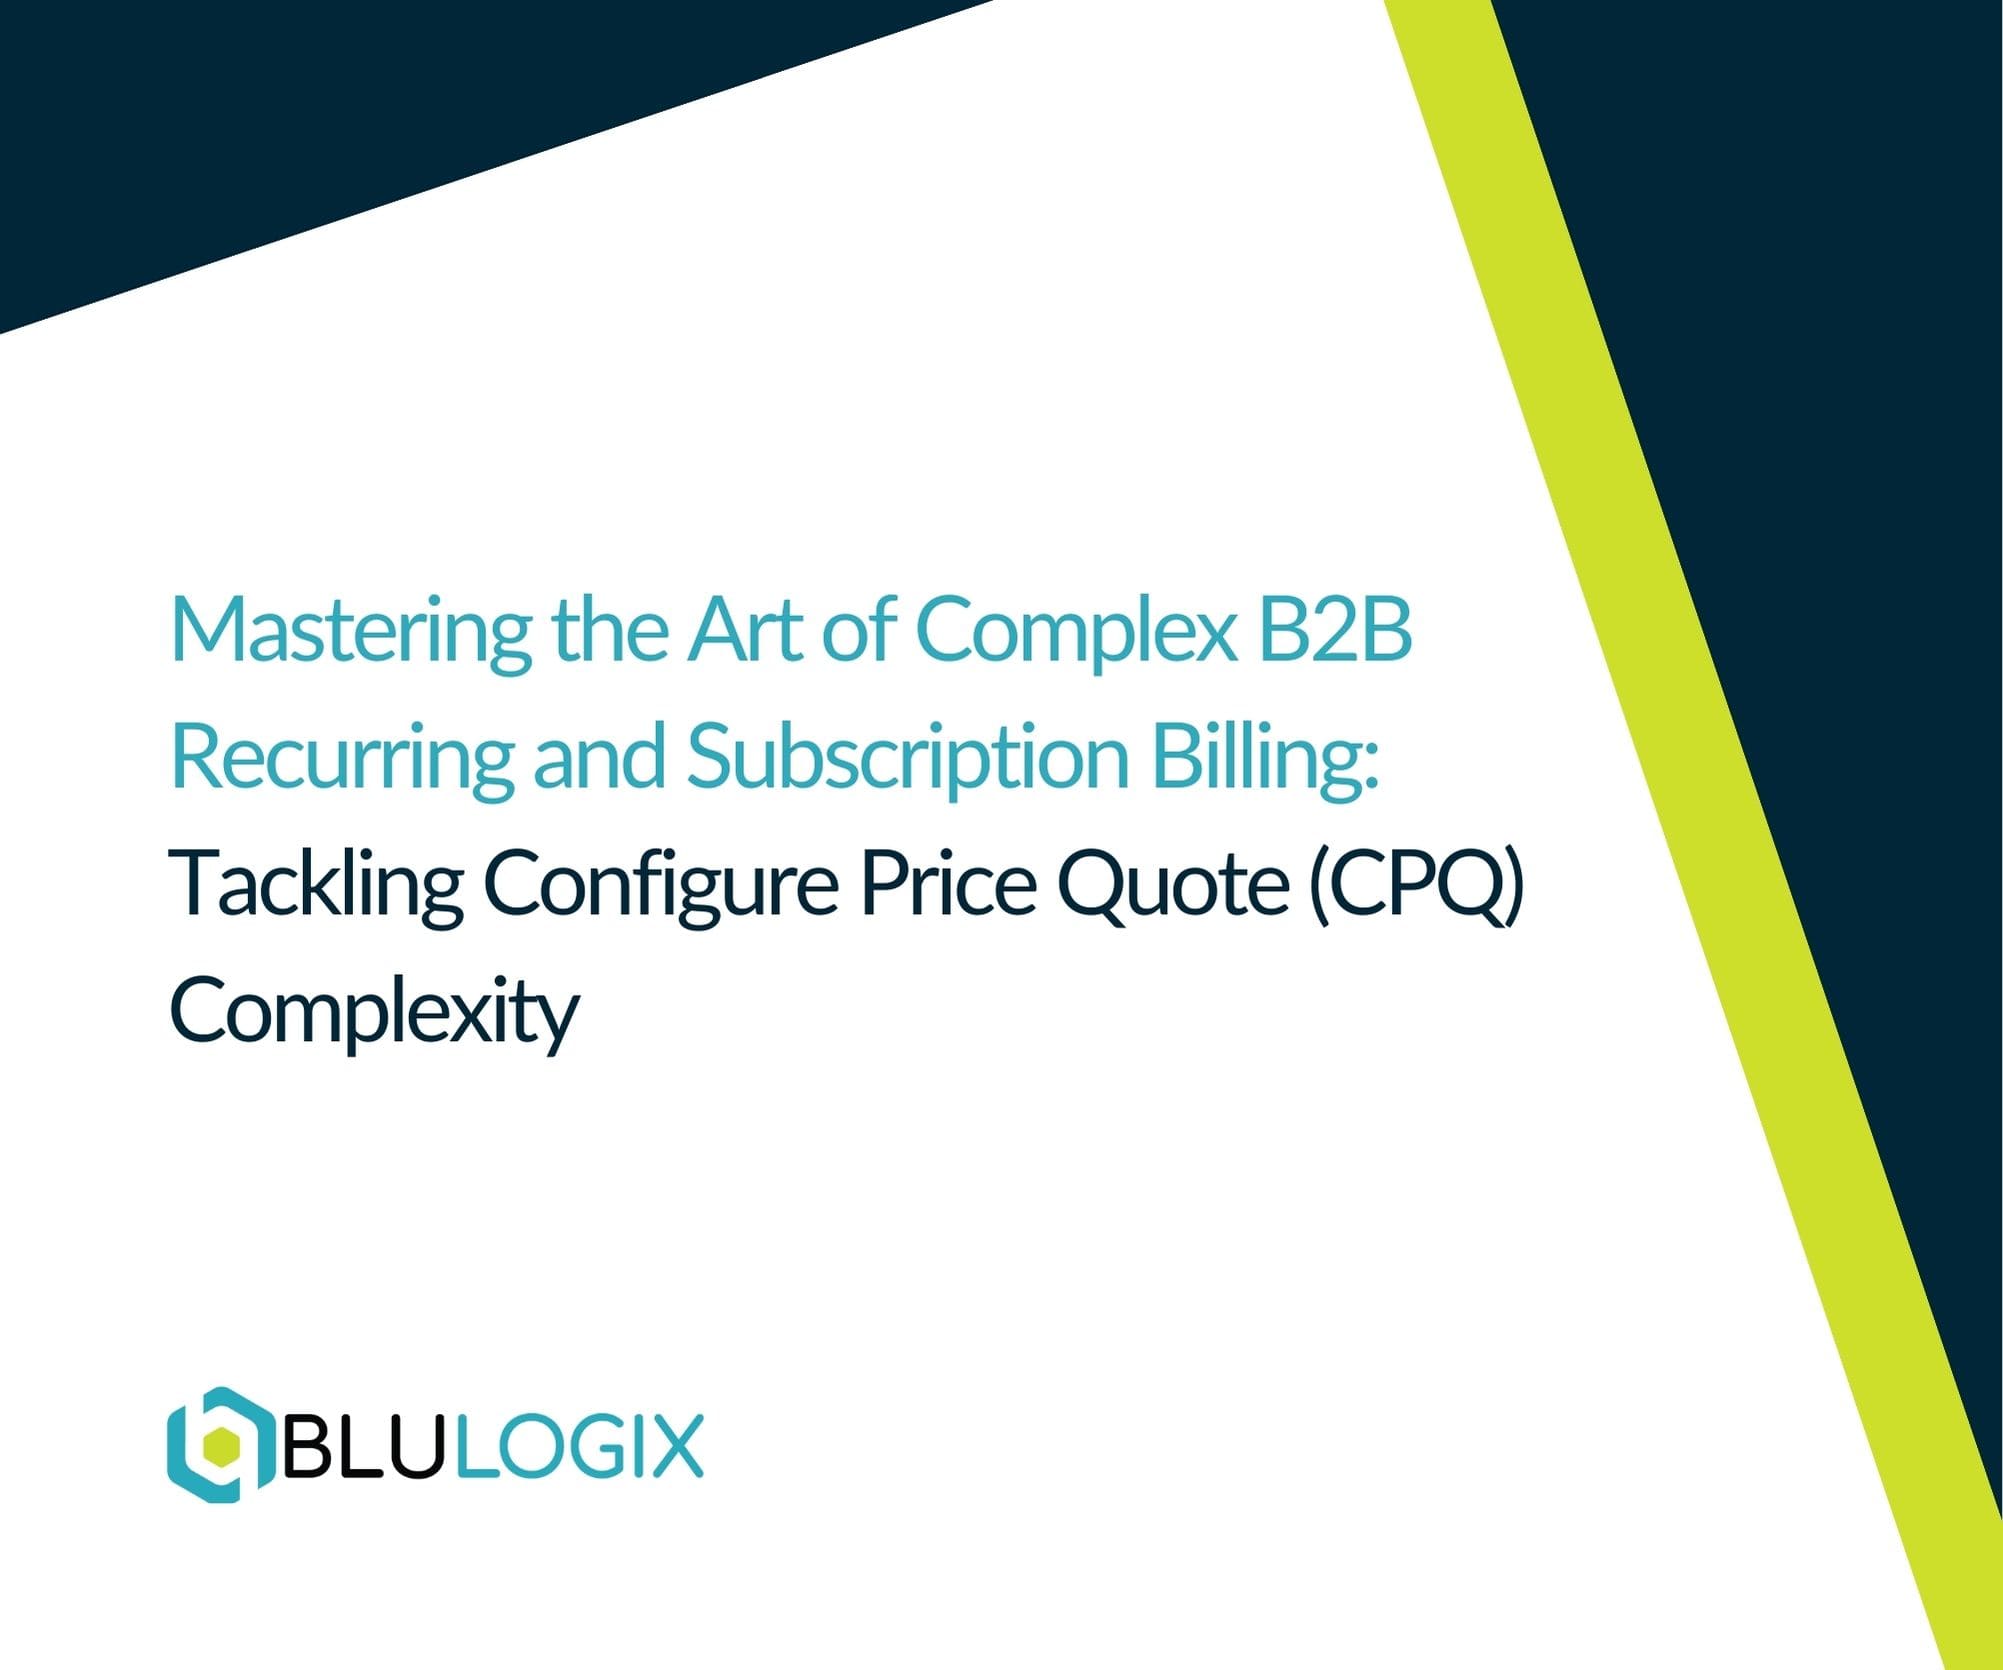 Mastering the Art of Complex B2B Recurring and Subscription Billing Tackling Configure Price Quote (CPQ) Complexity